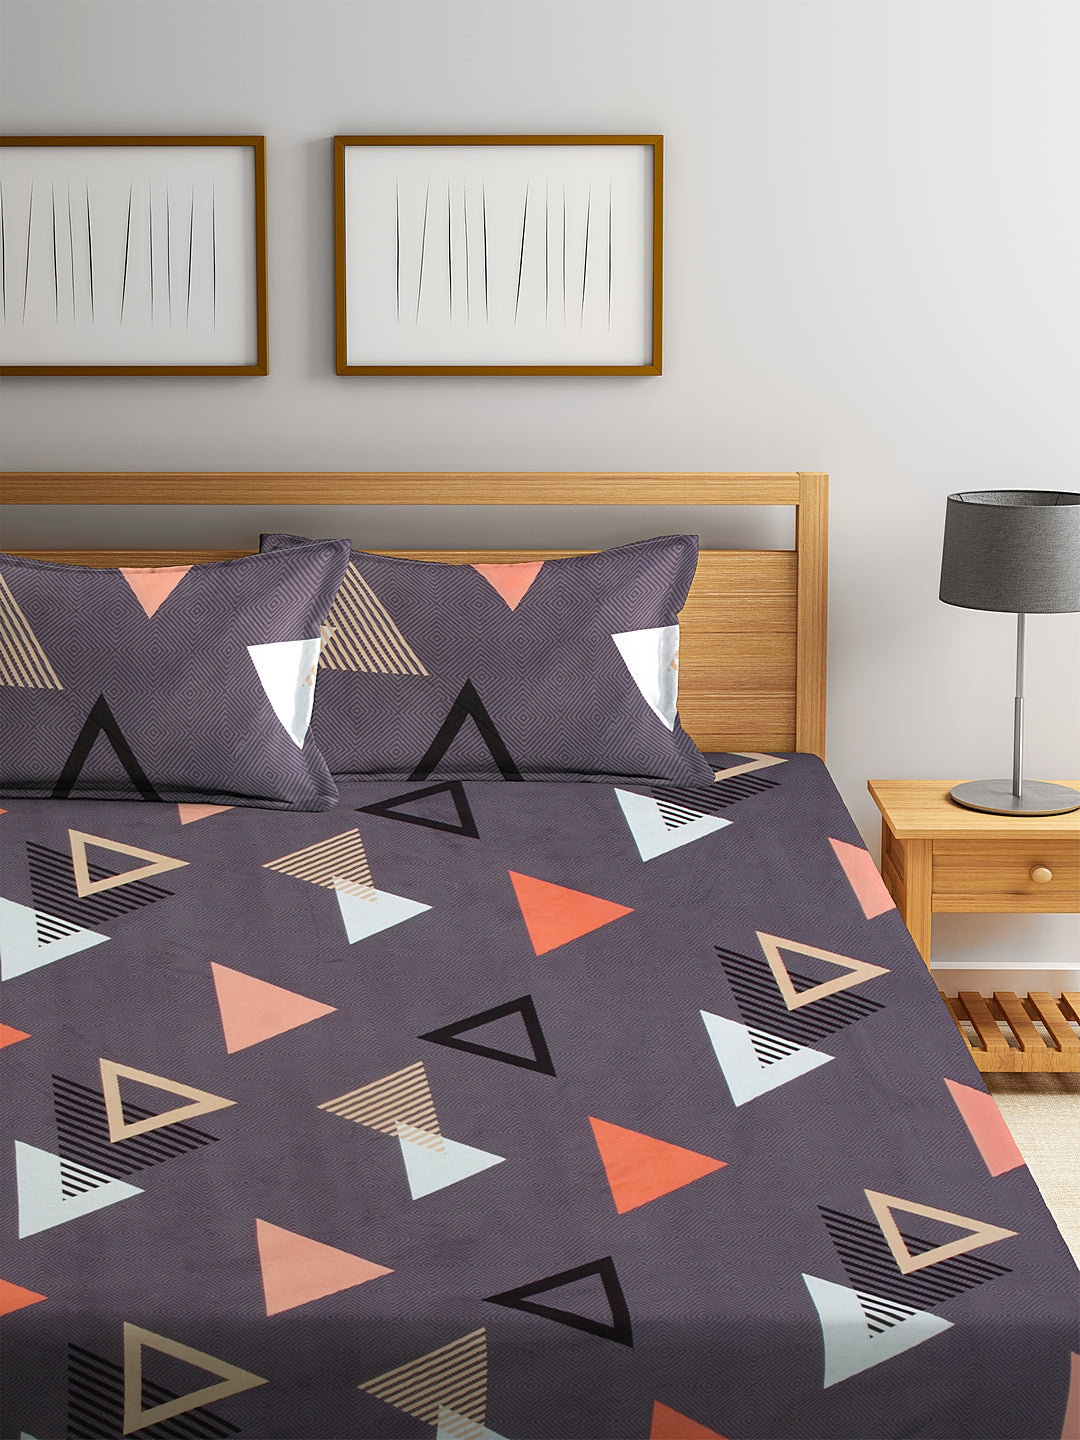 Klotthe Multicolor Geometric Cotton Blend Double Bed Sheet, 2 Pillow Covers & 2 Cushion Covers